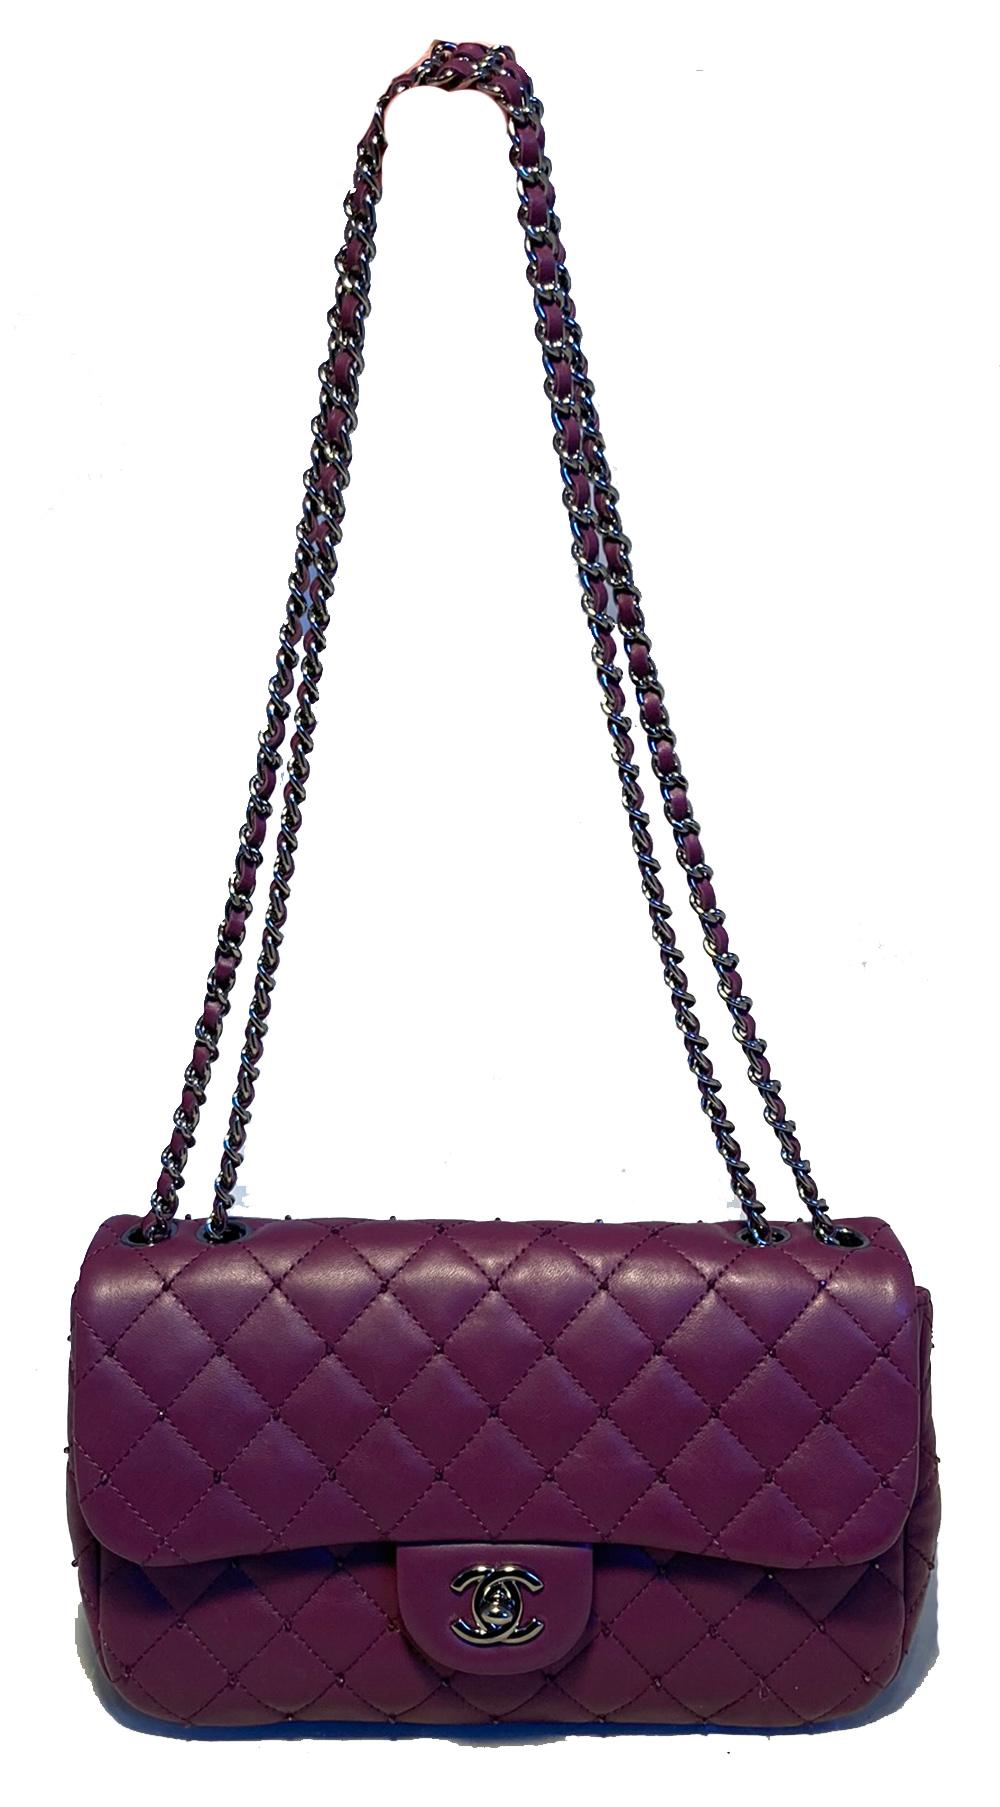 Chanel Purple Beaded Leather Classic Flap Shoulder Bag 6